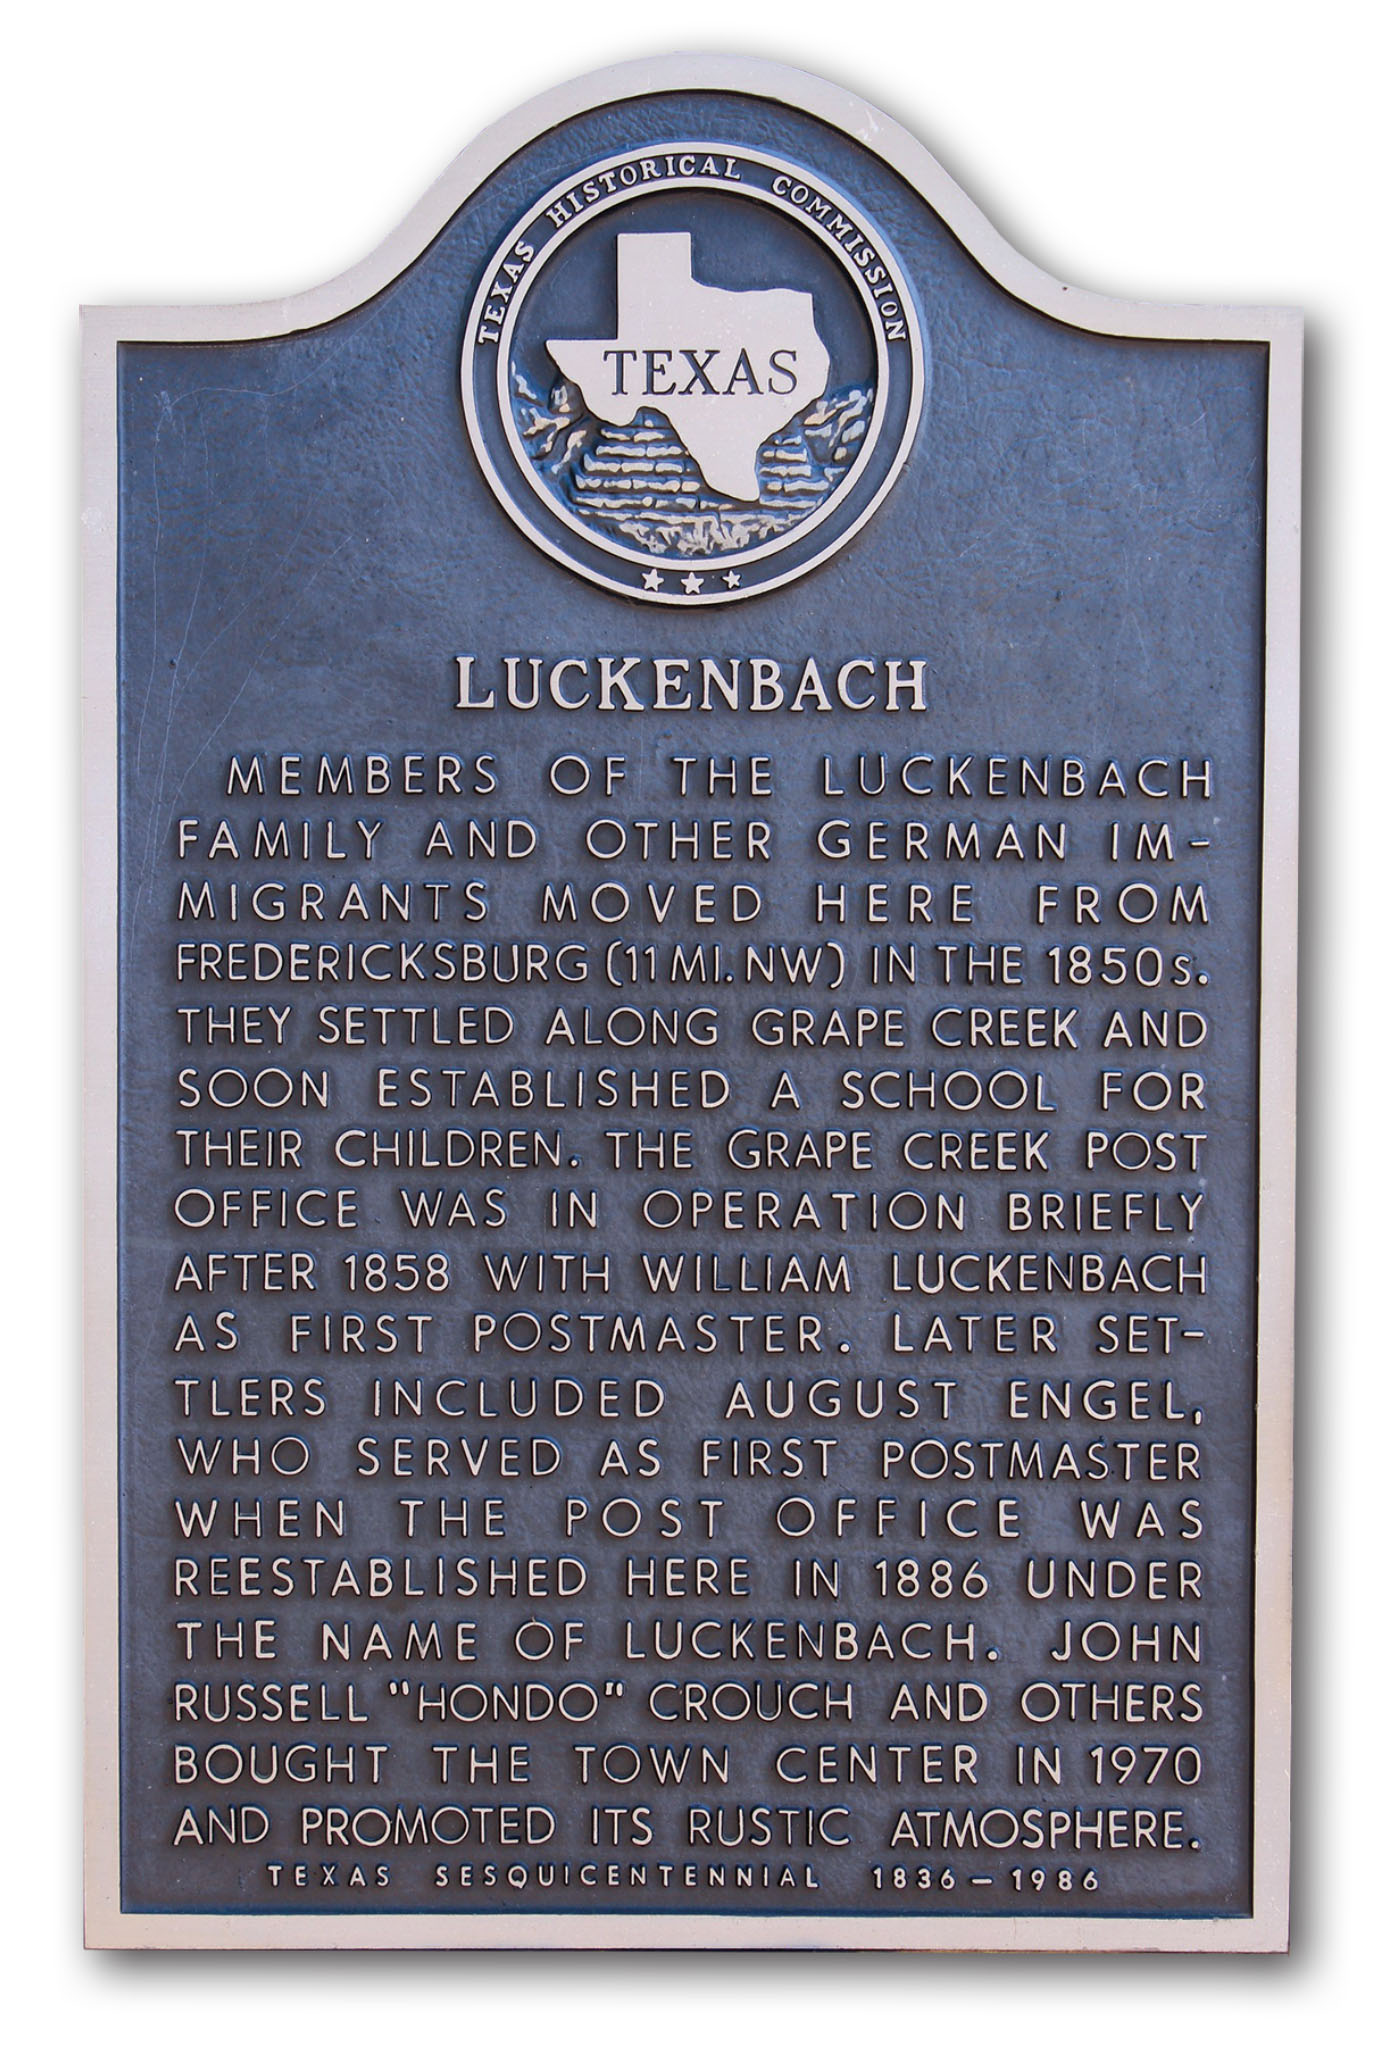 A Texas Historical Marker for Lukenbach on a white background